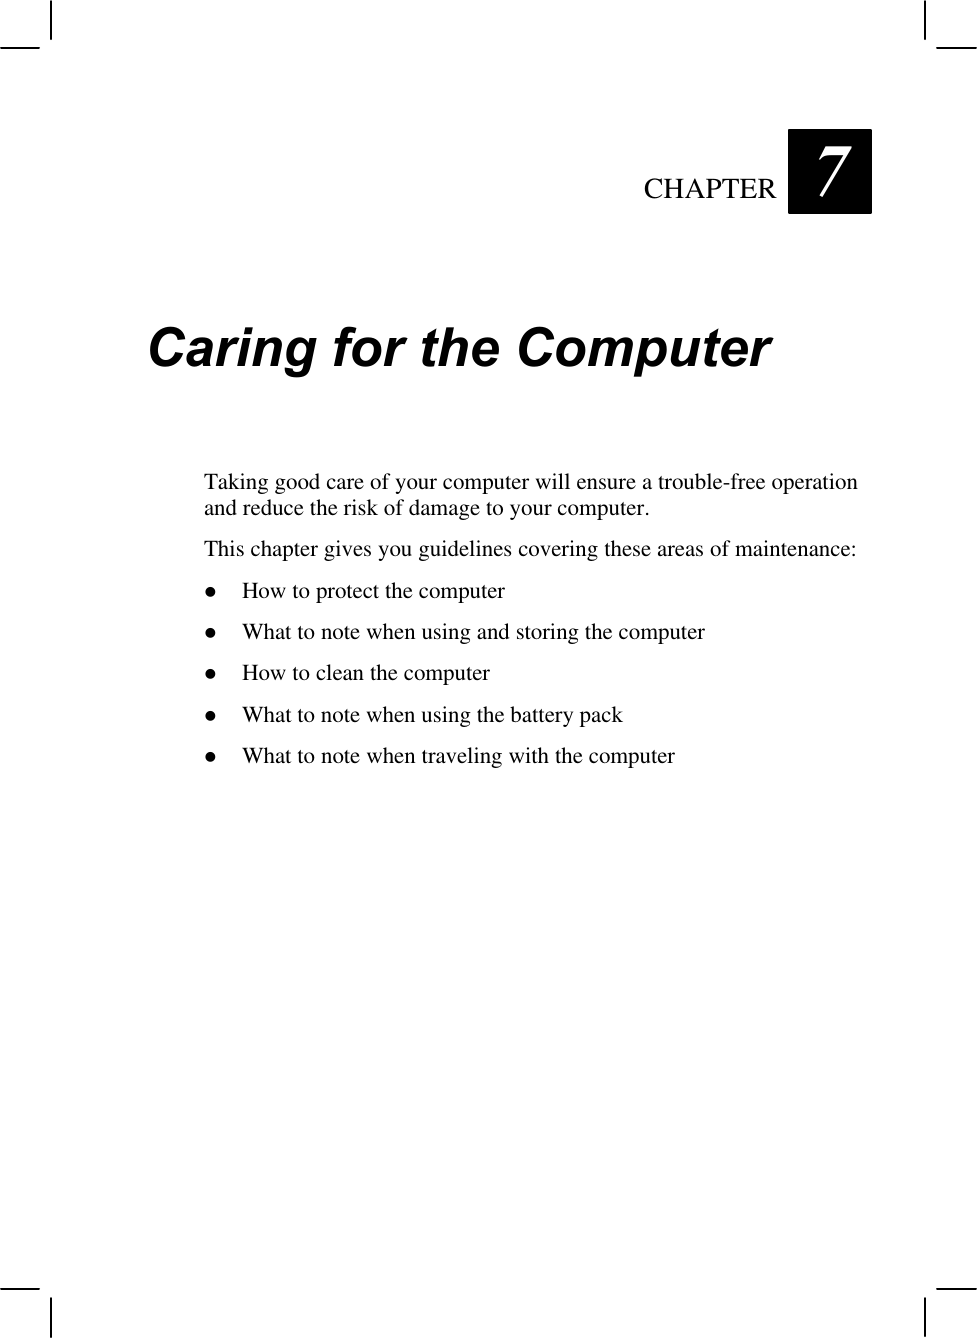 CHAPTER  7Caring for the ComputerTaking good care of your computer will ensure a trouble-free operationand reduce the risk of damage to your computer.This chapter gives you guidelines covering these areas of maintenance:l How to protect the computerl What to note when using and storing the computerl How to clean the computerl What to note when using the battery packl What to note when traveling with the computer